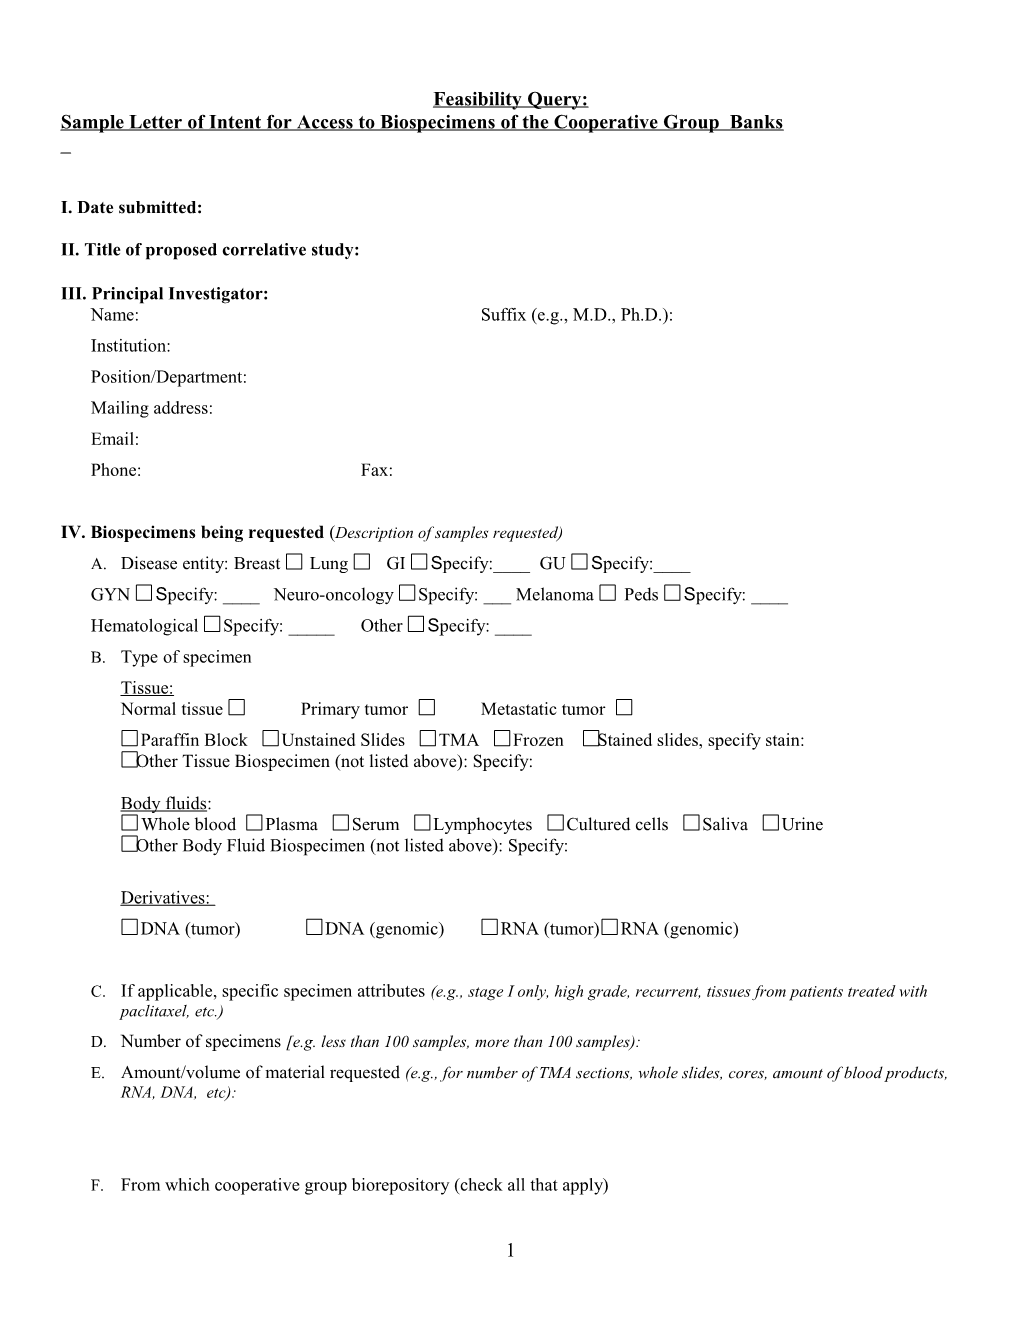 Sample Letter of Intent for Access to Biospecimens of the Cooperative Group Bank